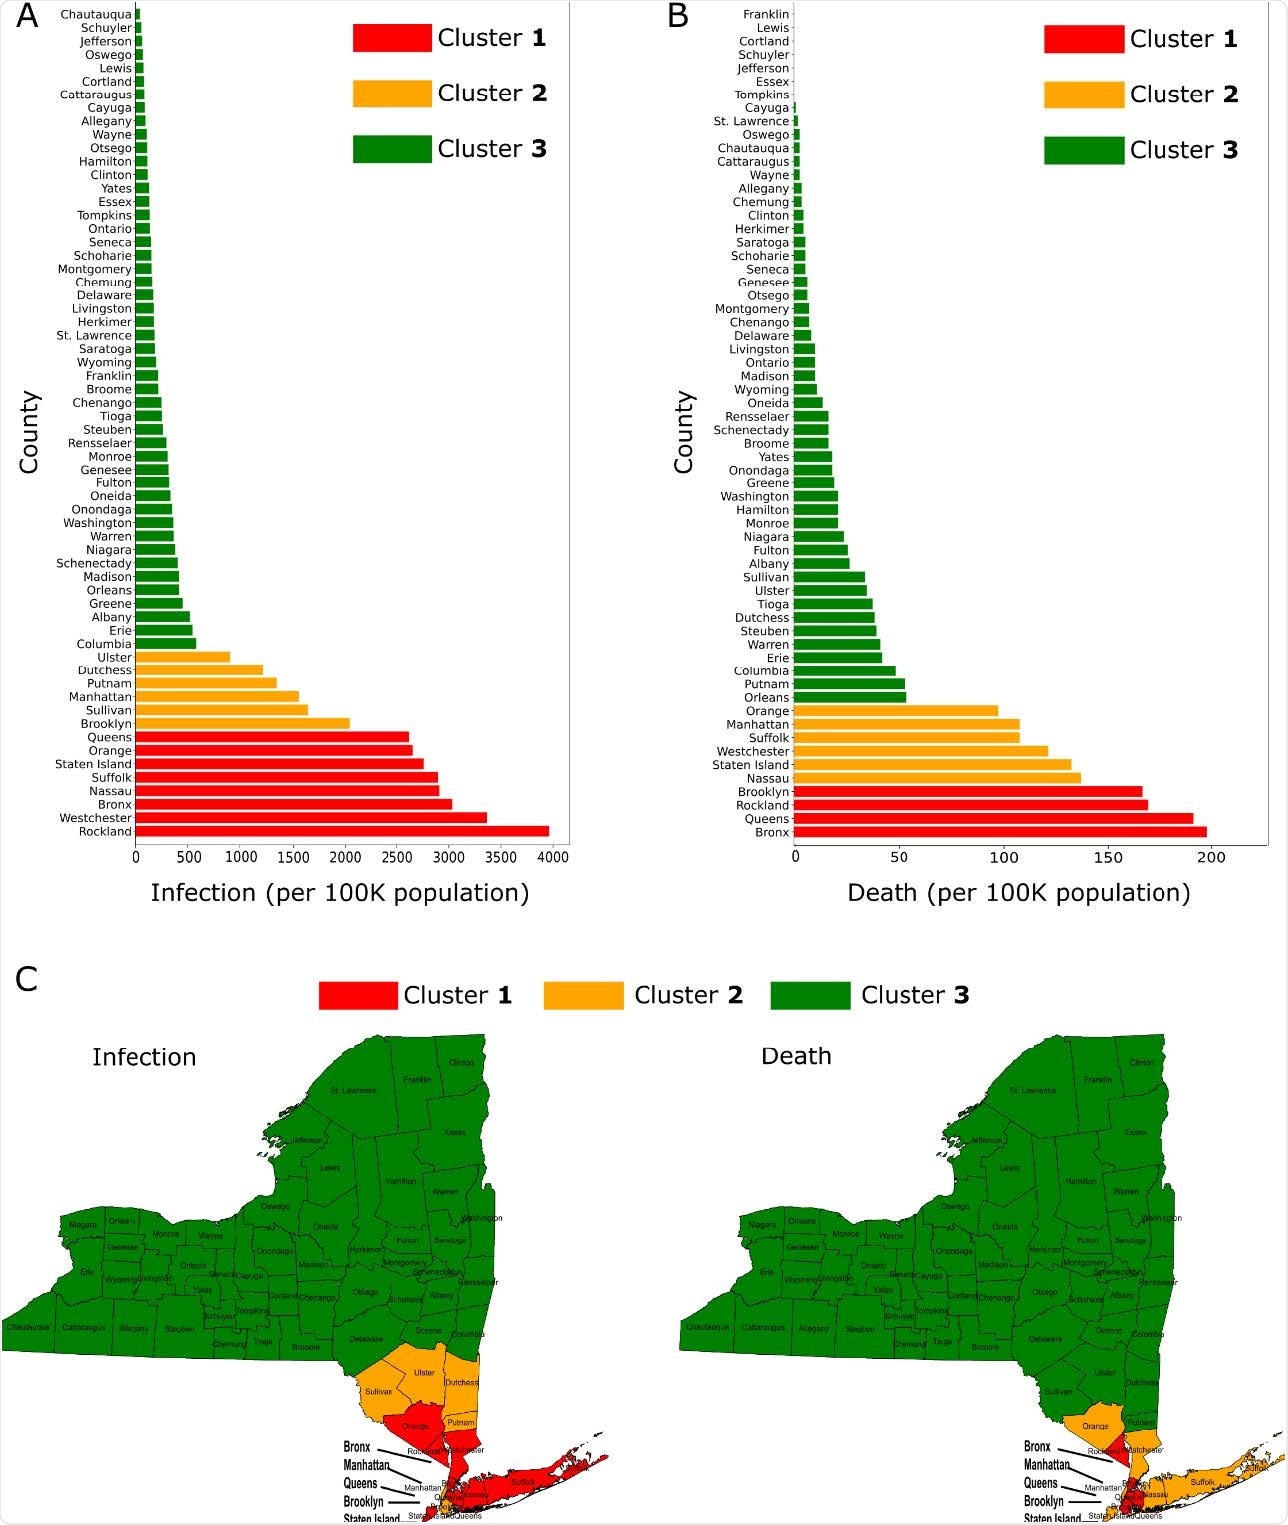 Infection and death from COVID-19 in NYS counties (data till May 16, 2020). (A-B) Infection rates (A) and death rates (B) rates of individual counties are shown; counties are further grouped into three clusters using k-means clustering technique. (C) Maps of NYS showing the locations of counties included in each of the clusters.